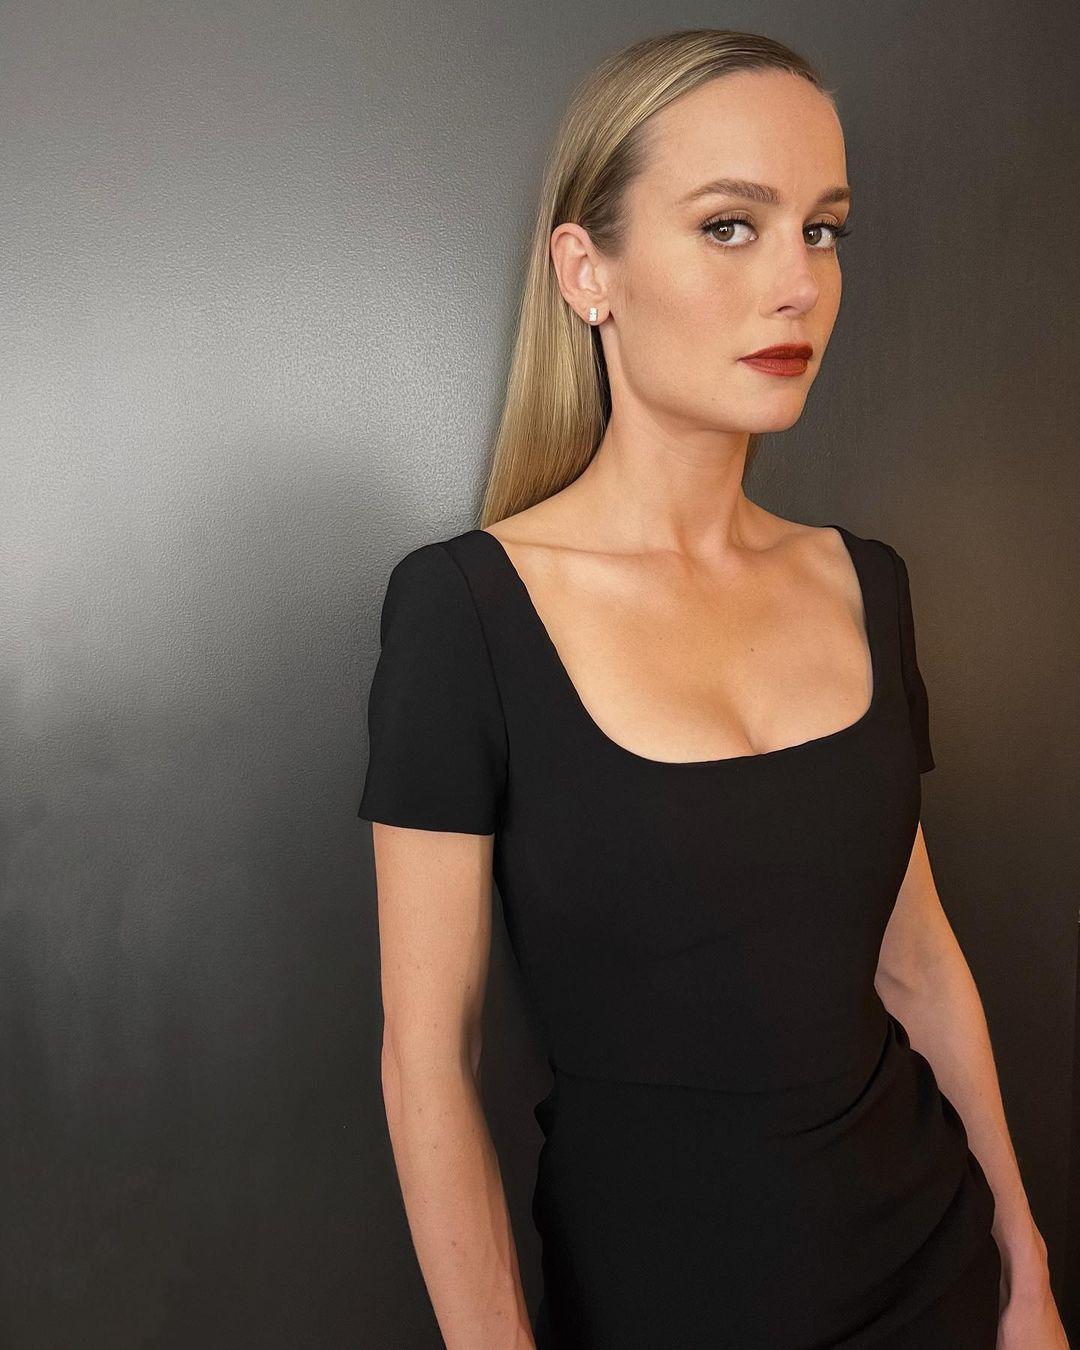 Brie Larson posing for the camera.